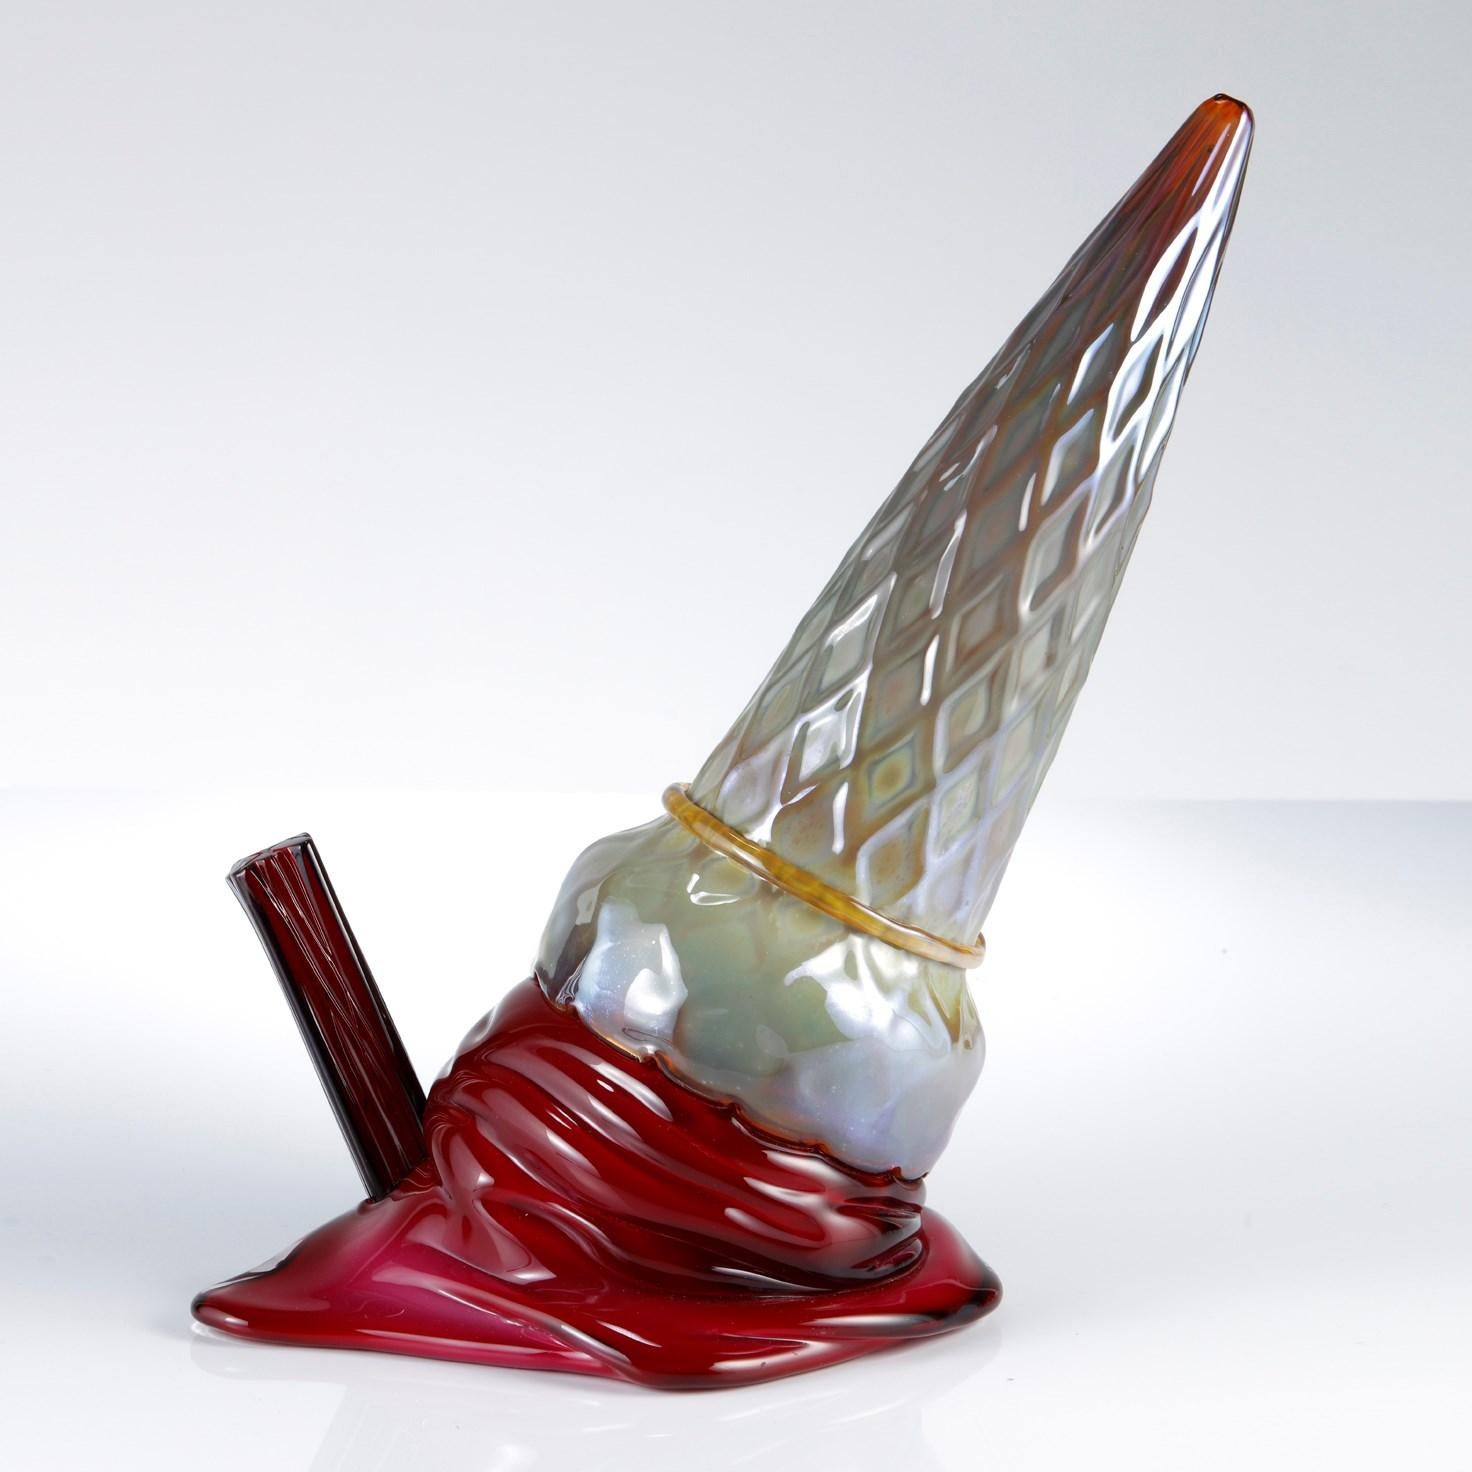 'Delusione with Flake in Gold & Raspberry' is a unique glass sculptural ice cream by the British artists, Bethany Wood & Elliot Walker.

Bethany Wood

Taking inspiration from a wide range of sources, Wood’s influences are taken directly from the